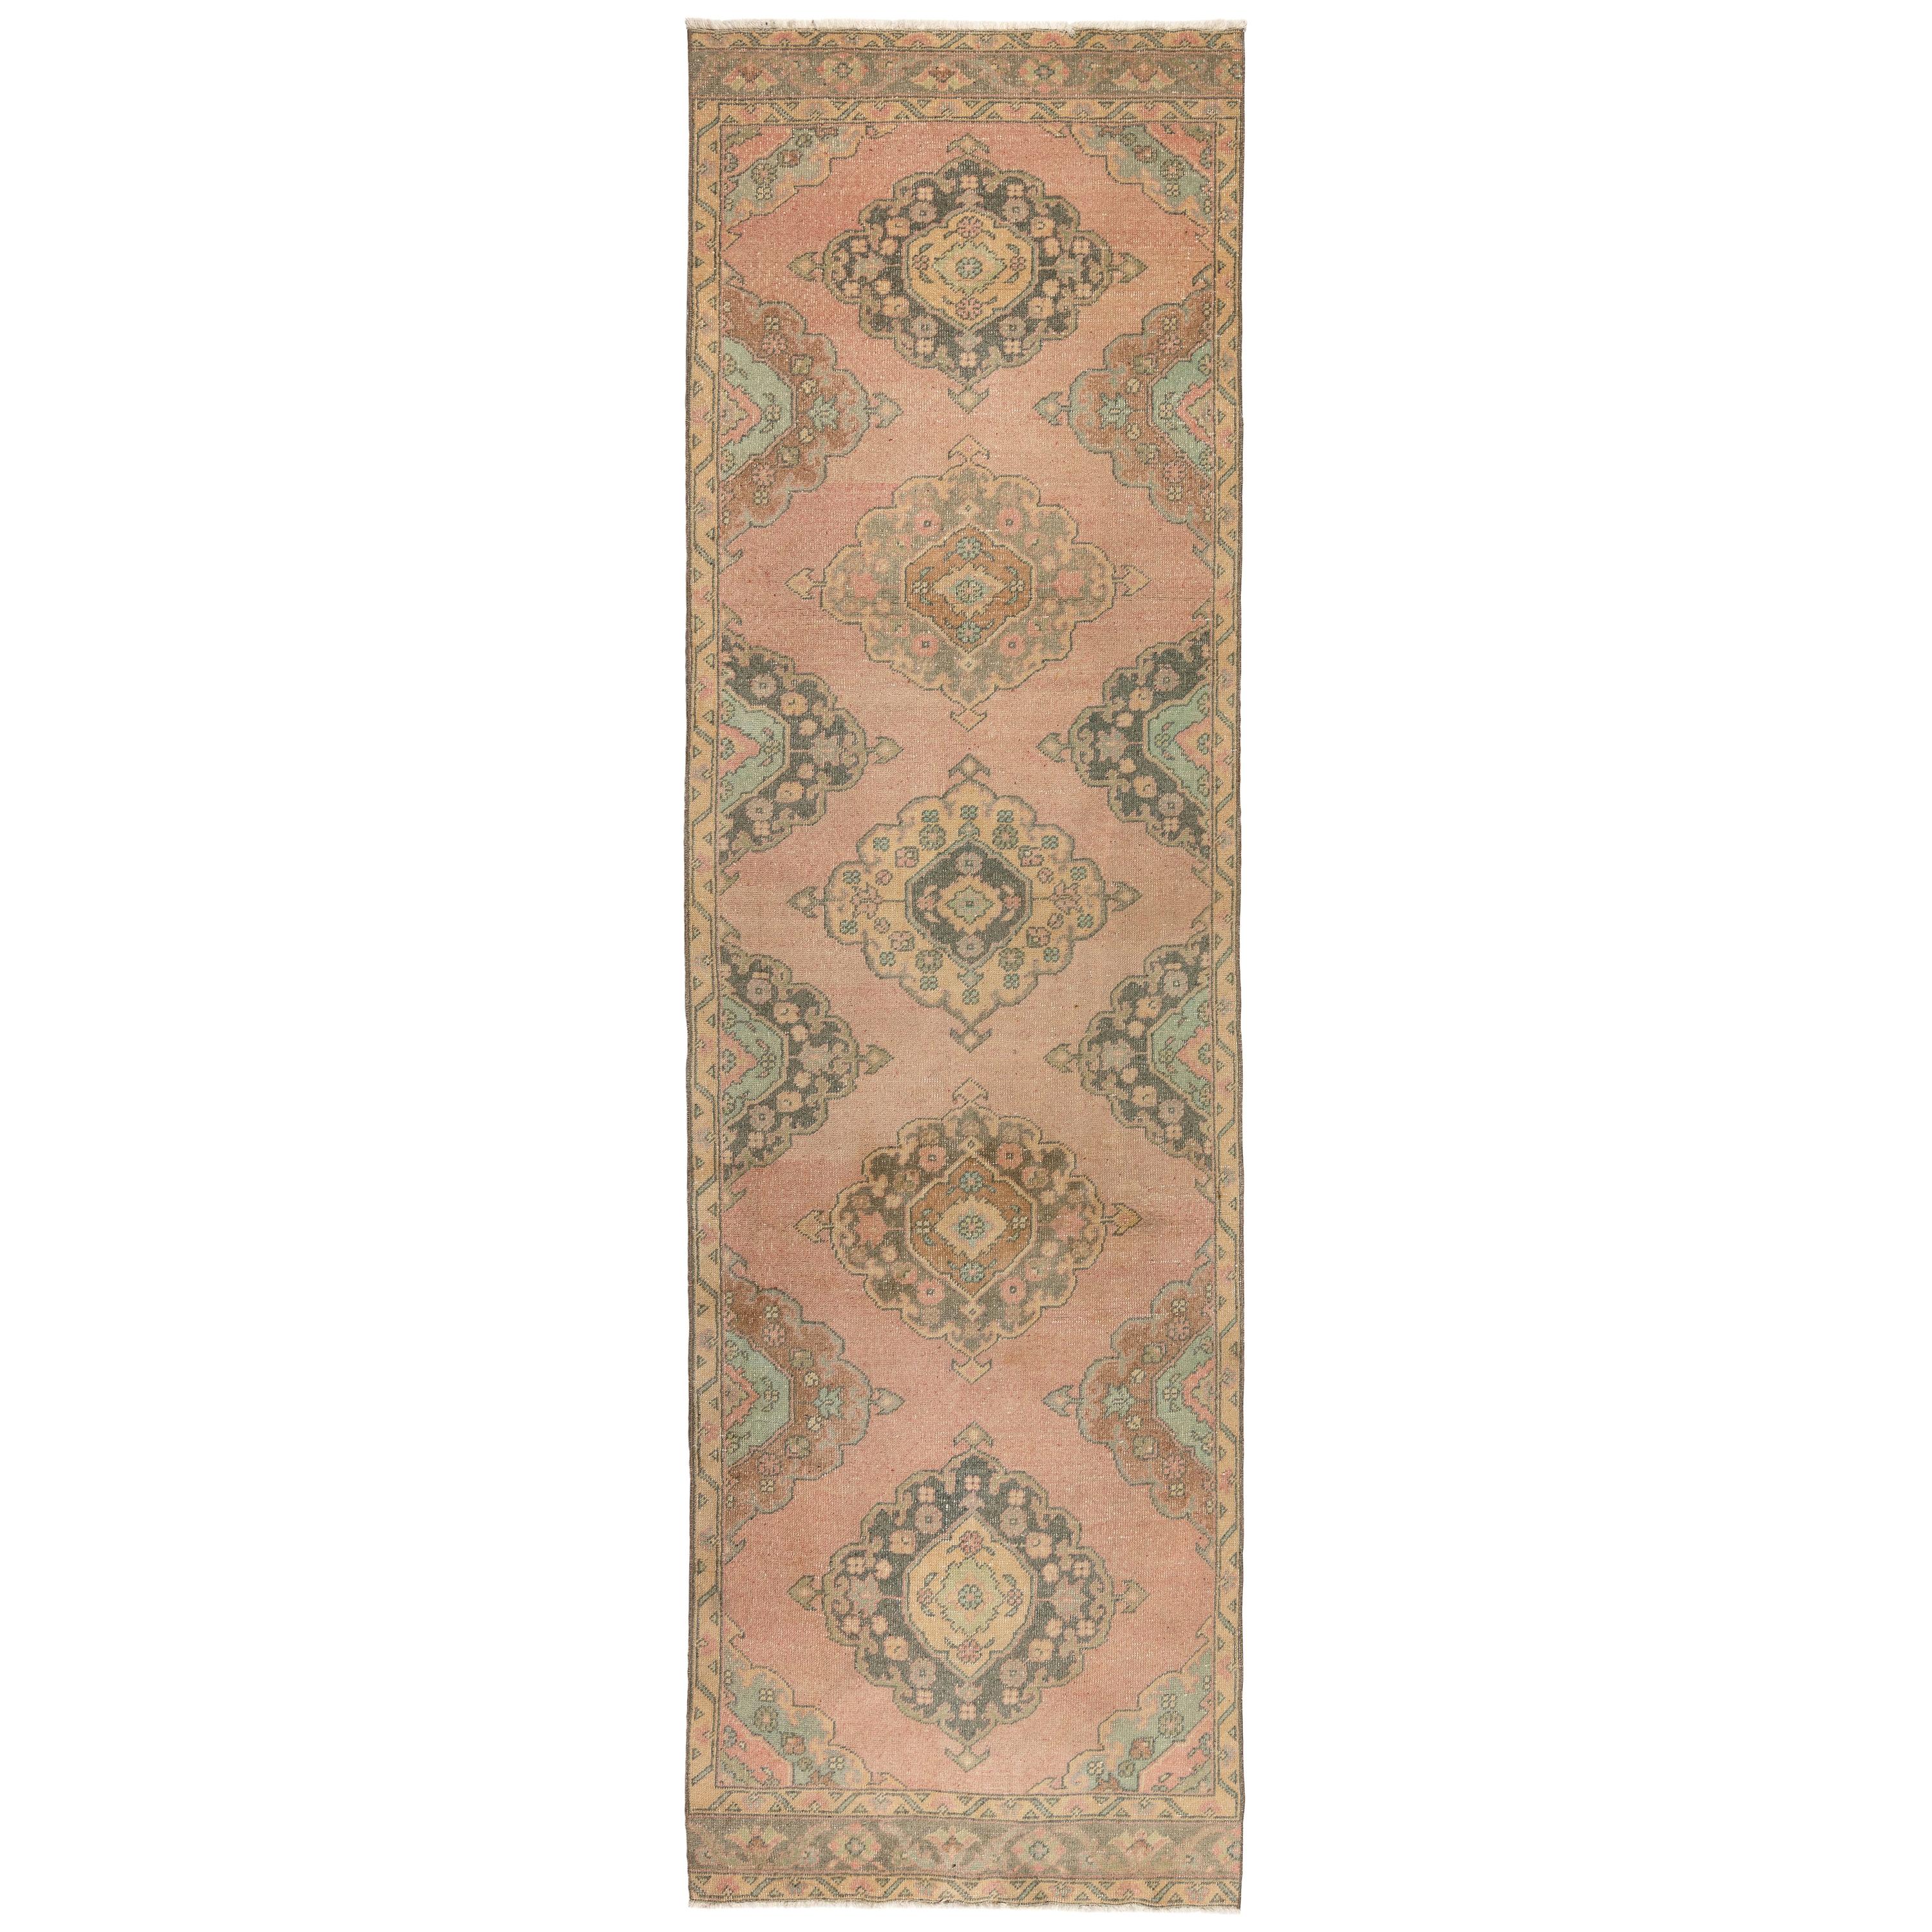 3.7x11.2 Ft Hand-Knotted Vintage Turkish Runner Rug in Faded Coral & Light Blue